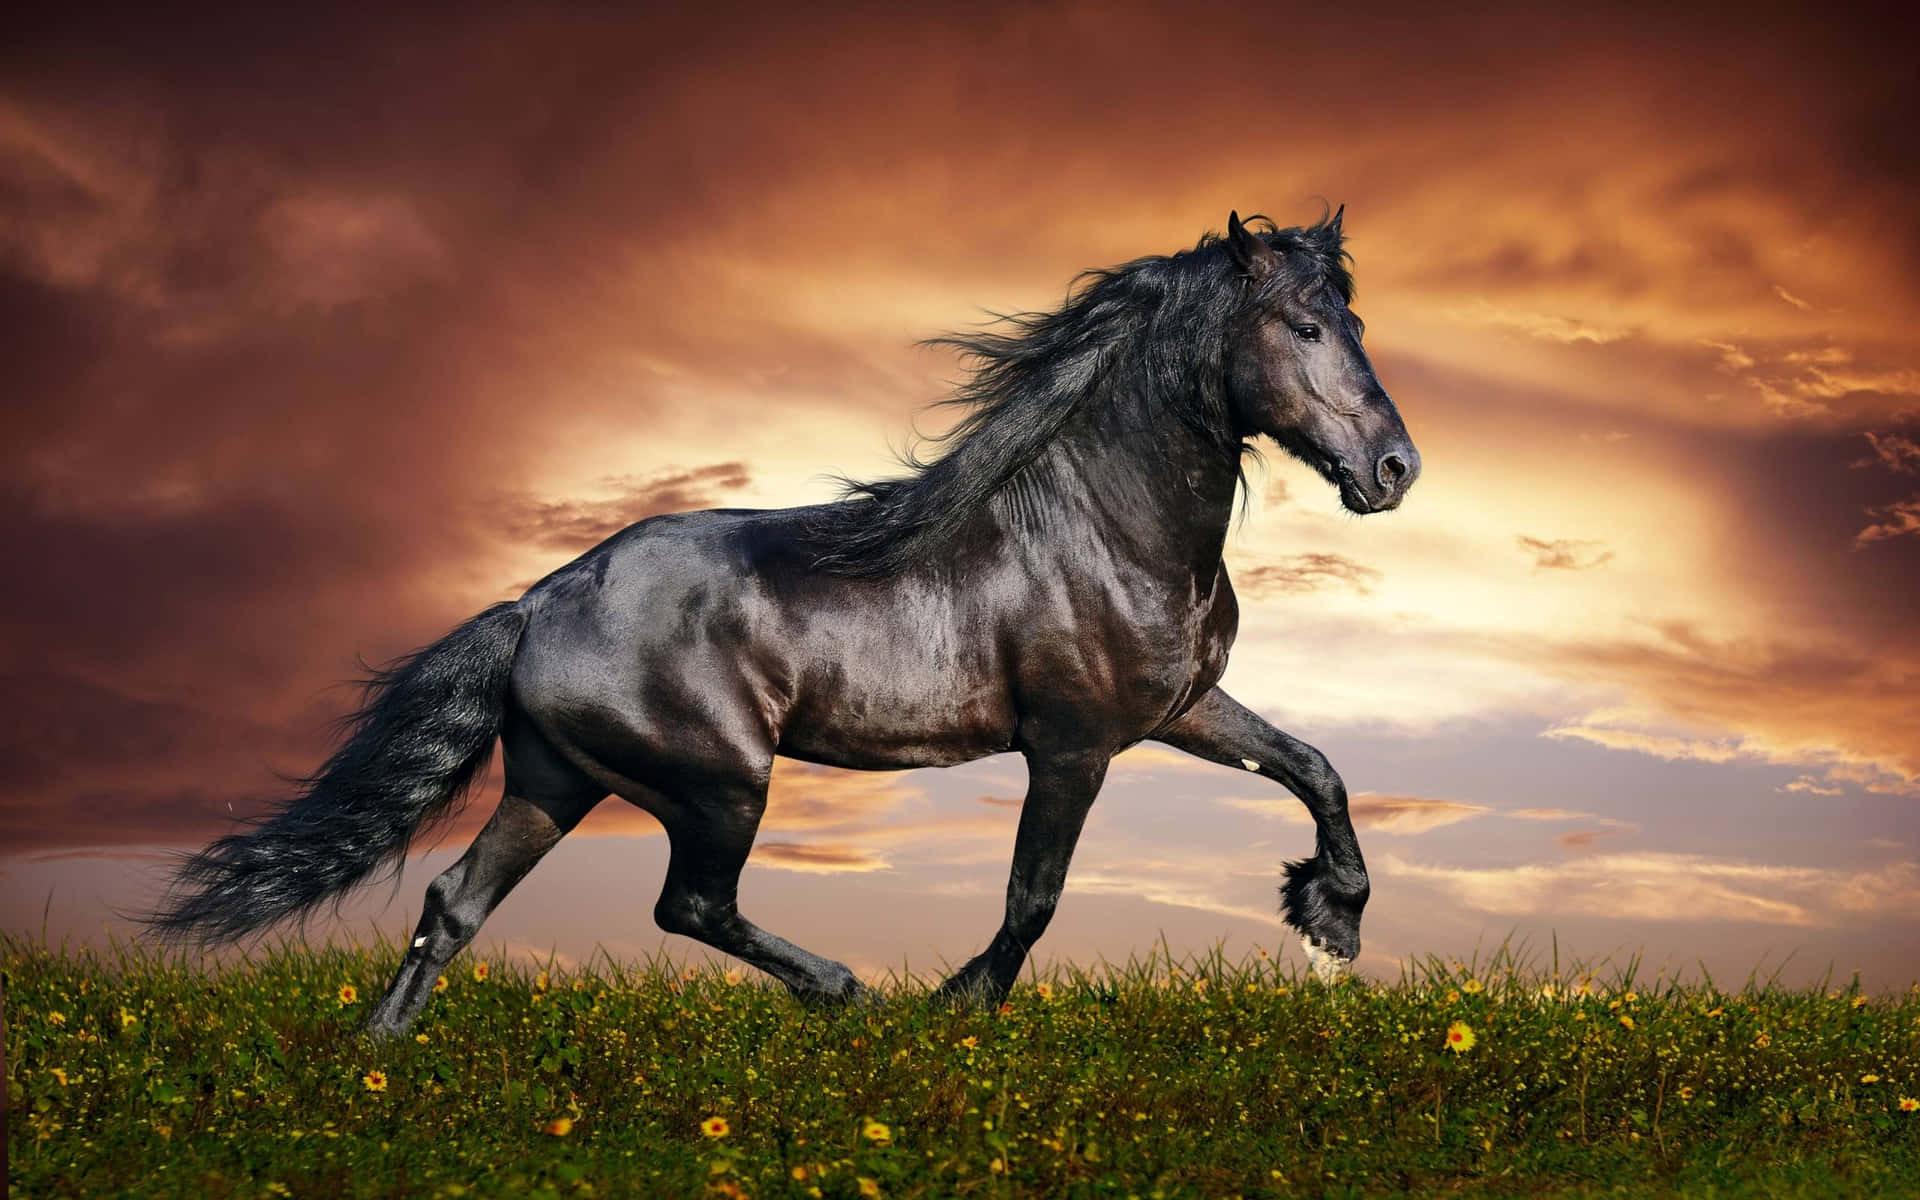 A bold and spirited horse standing tall surrounded by beautiful floral scenery. Wallpaper